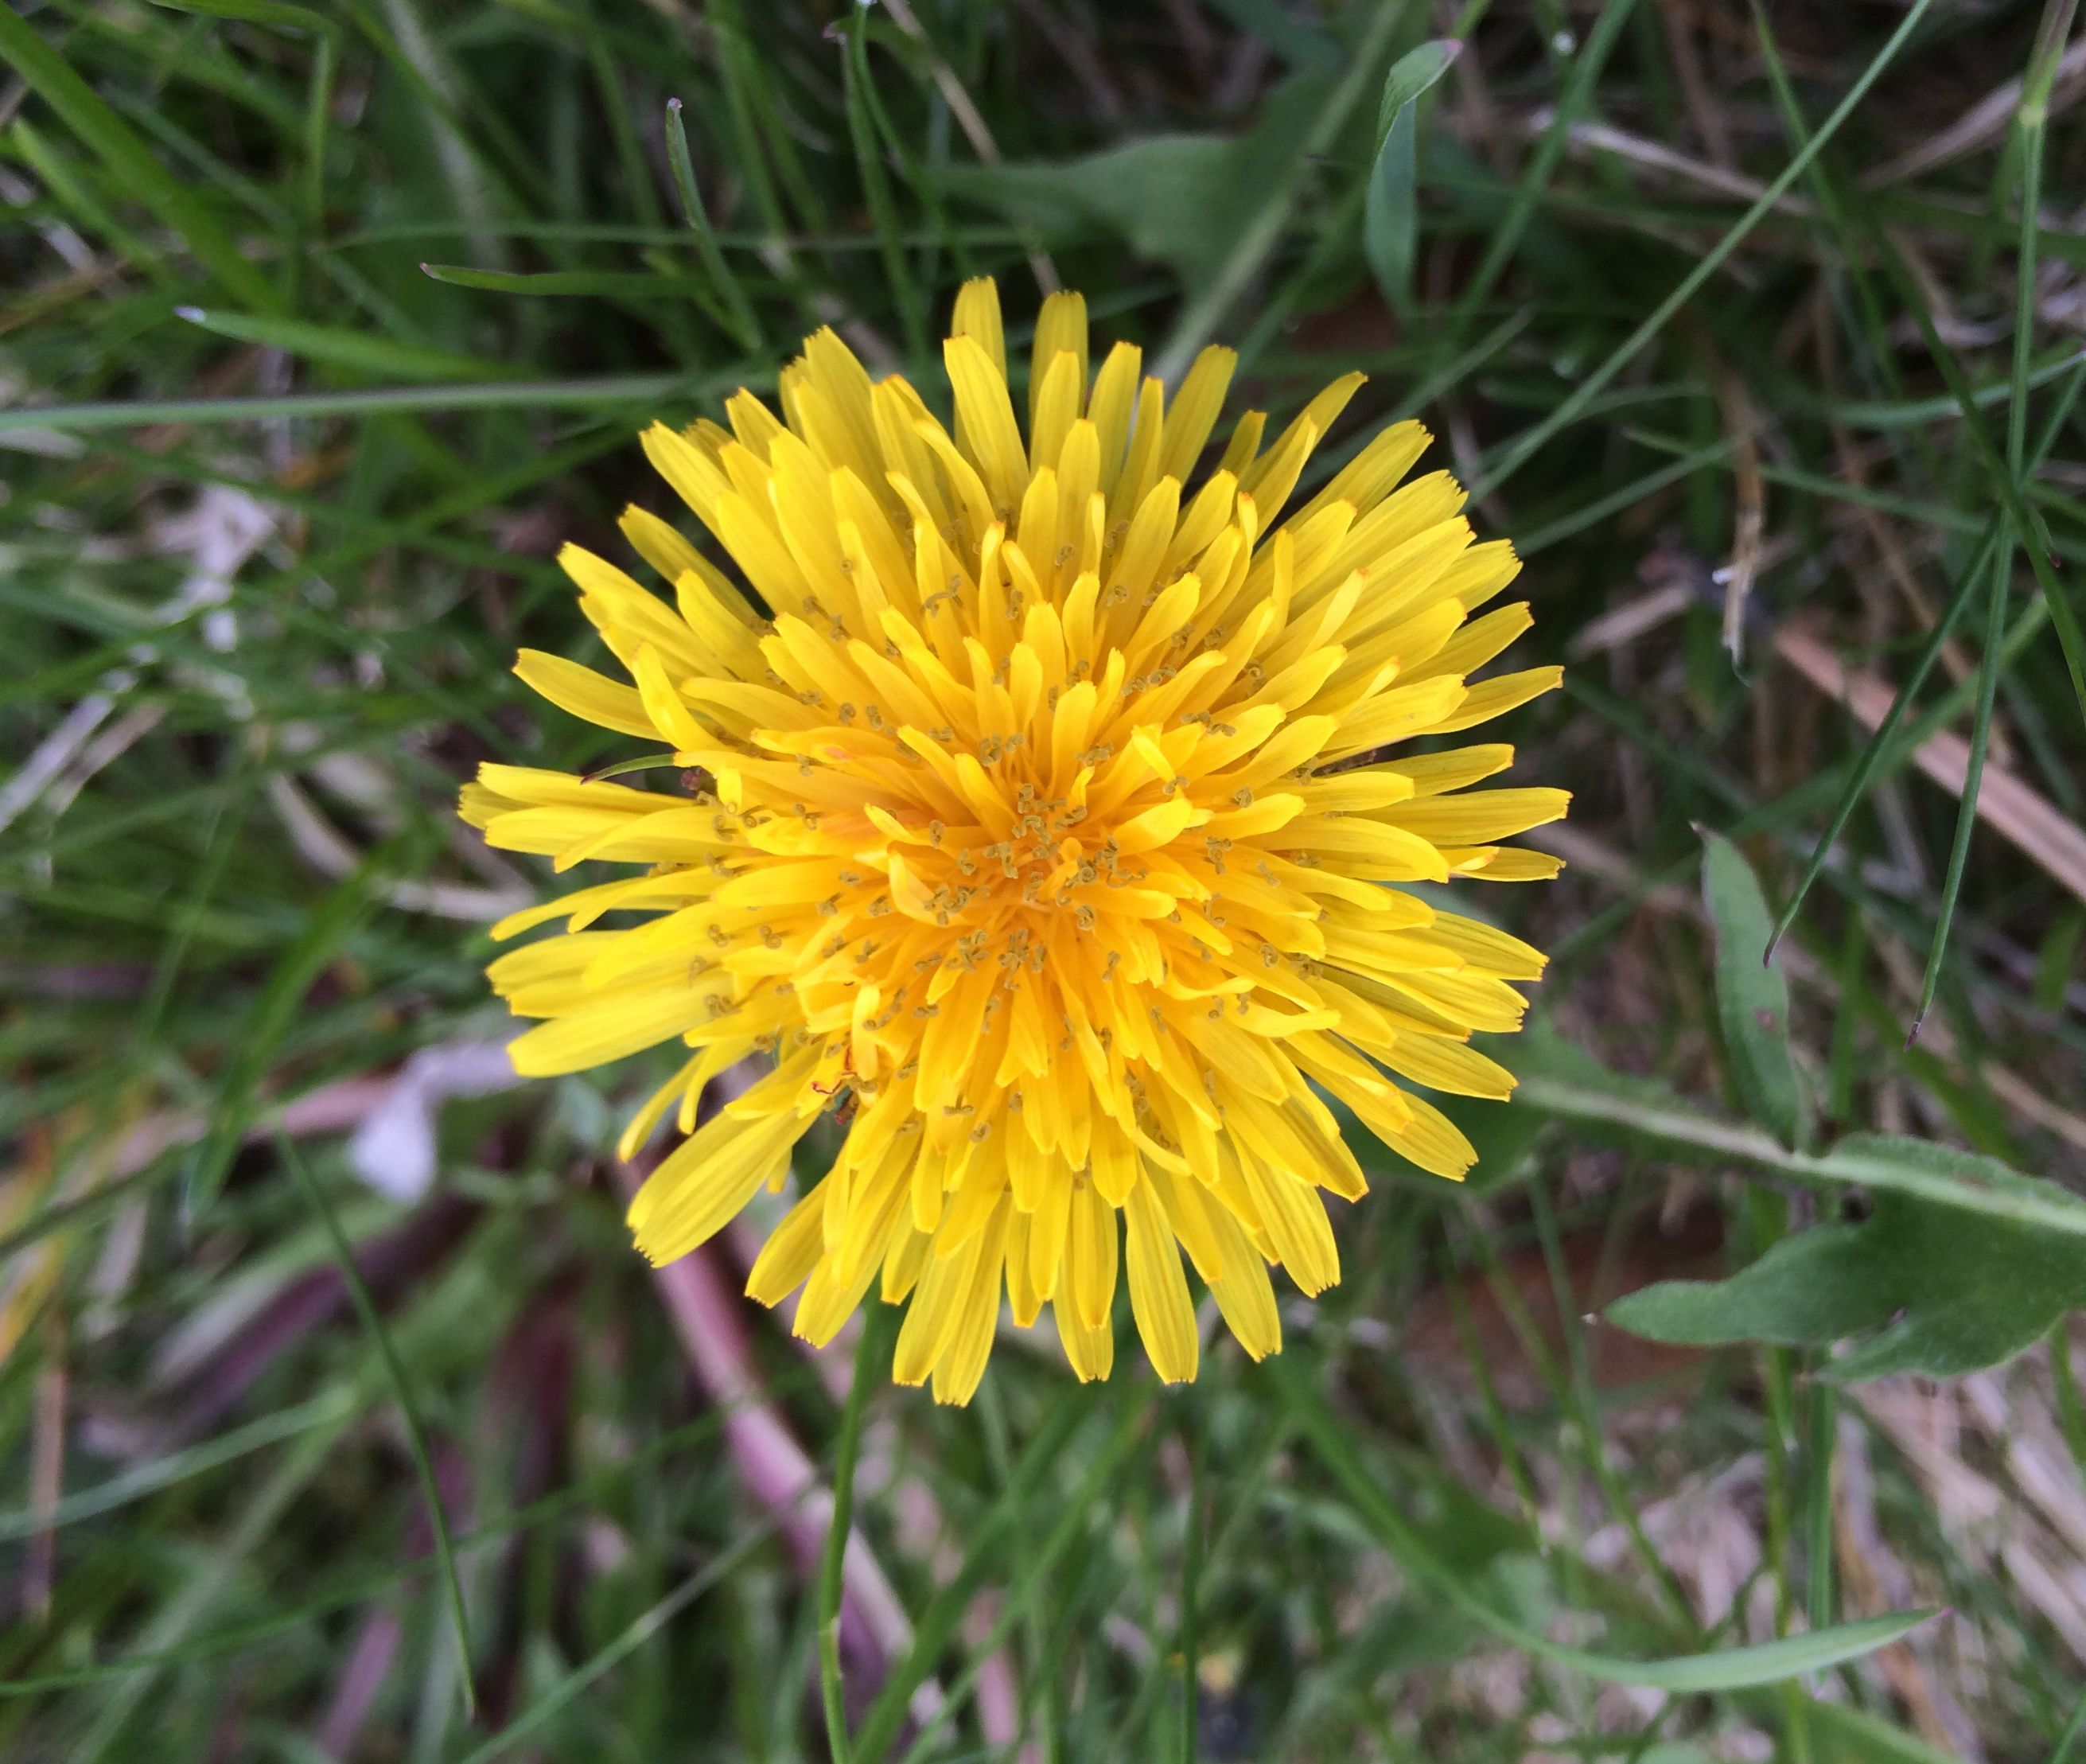 Lessons from a Dandelion.